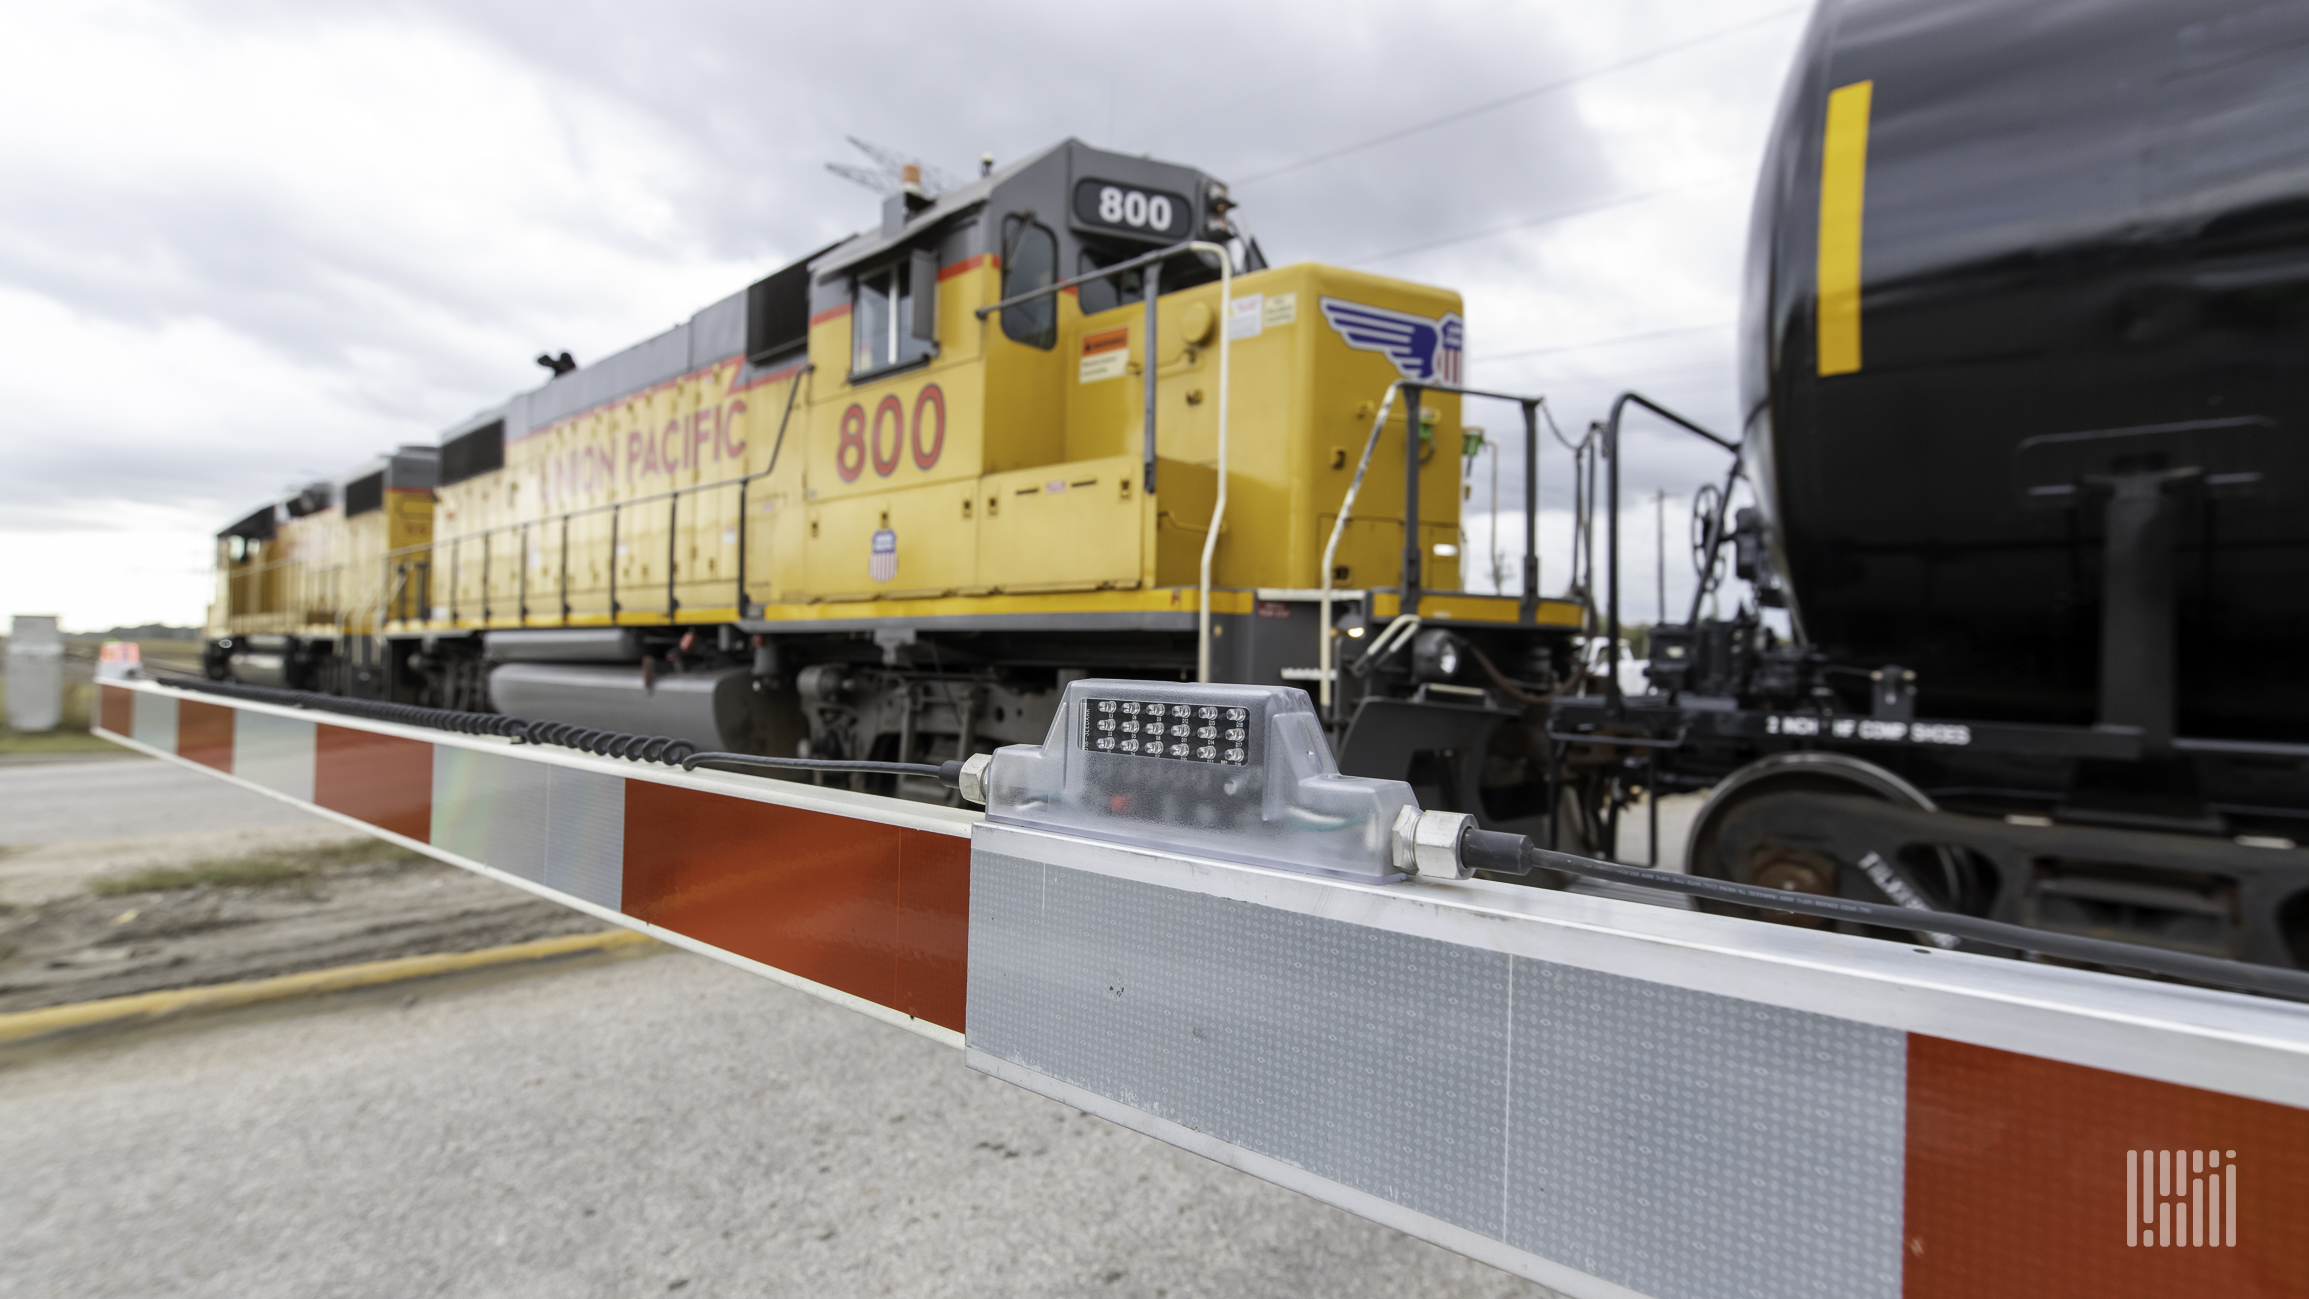 A photograph of a Union Pacific locomotive and a tank car rolling by a railroad crossing.